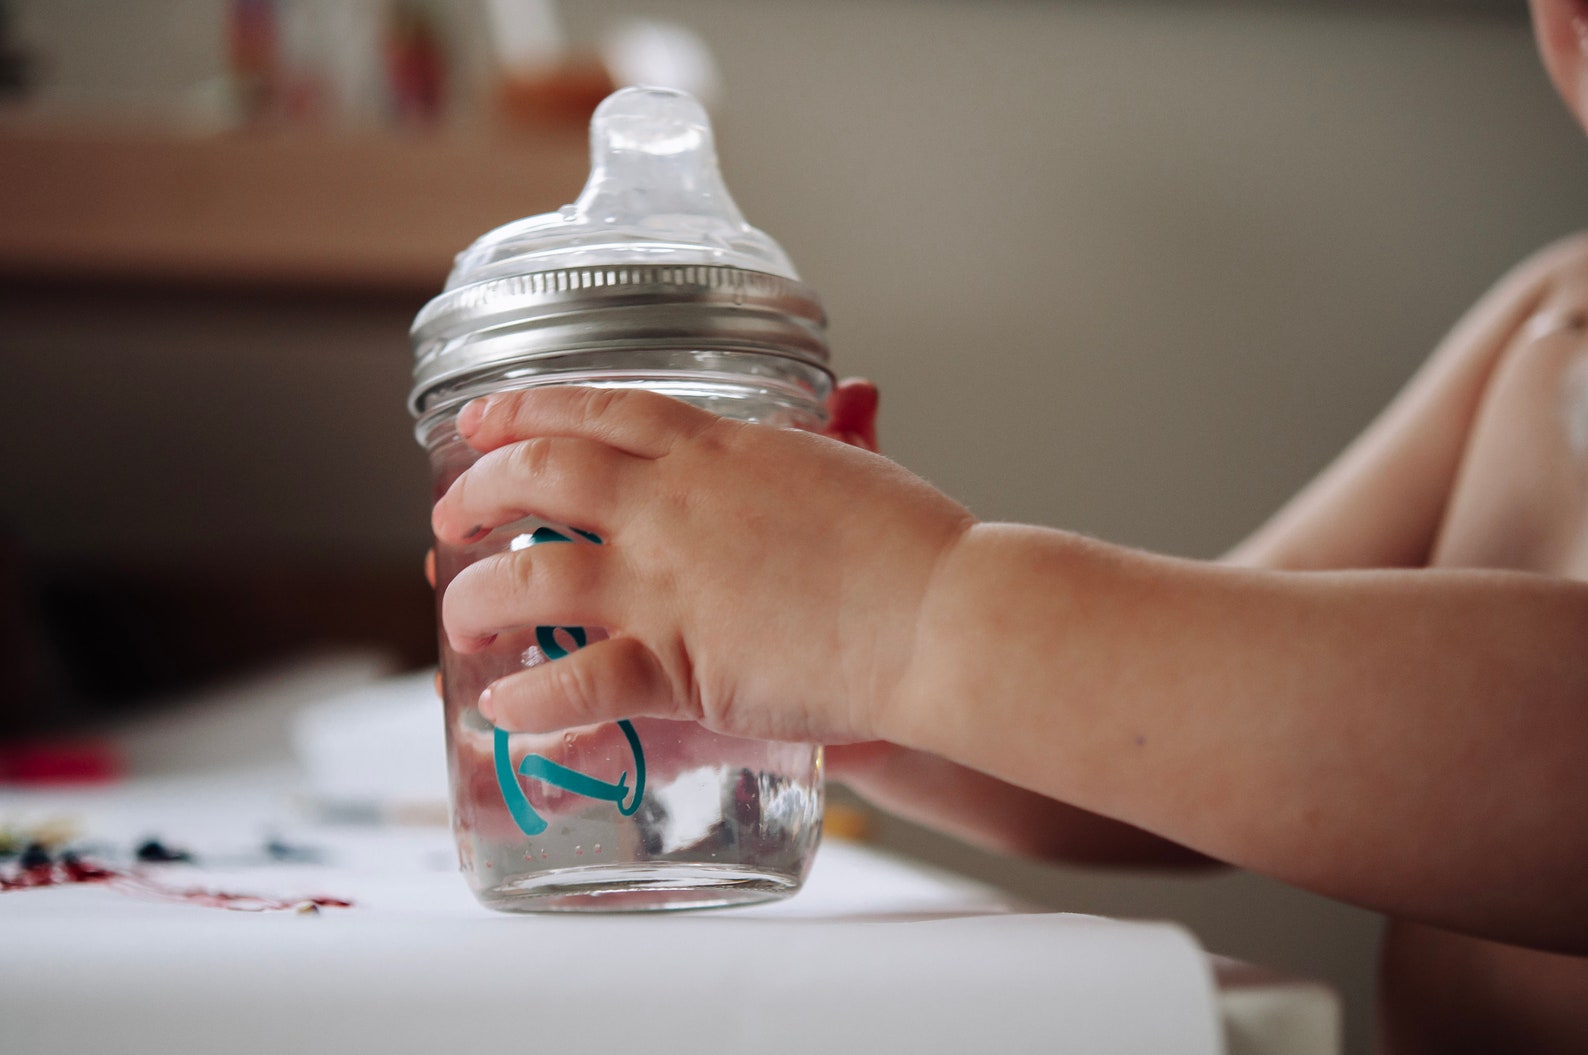 Unspillable Mugs And More Lifesaving Baby Products - PureWow